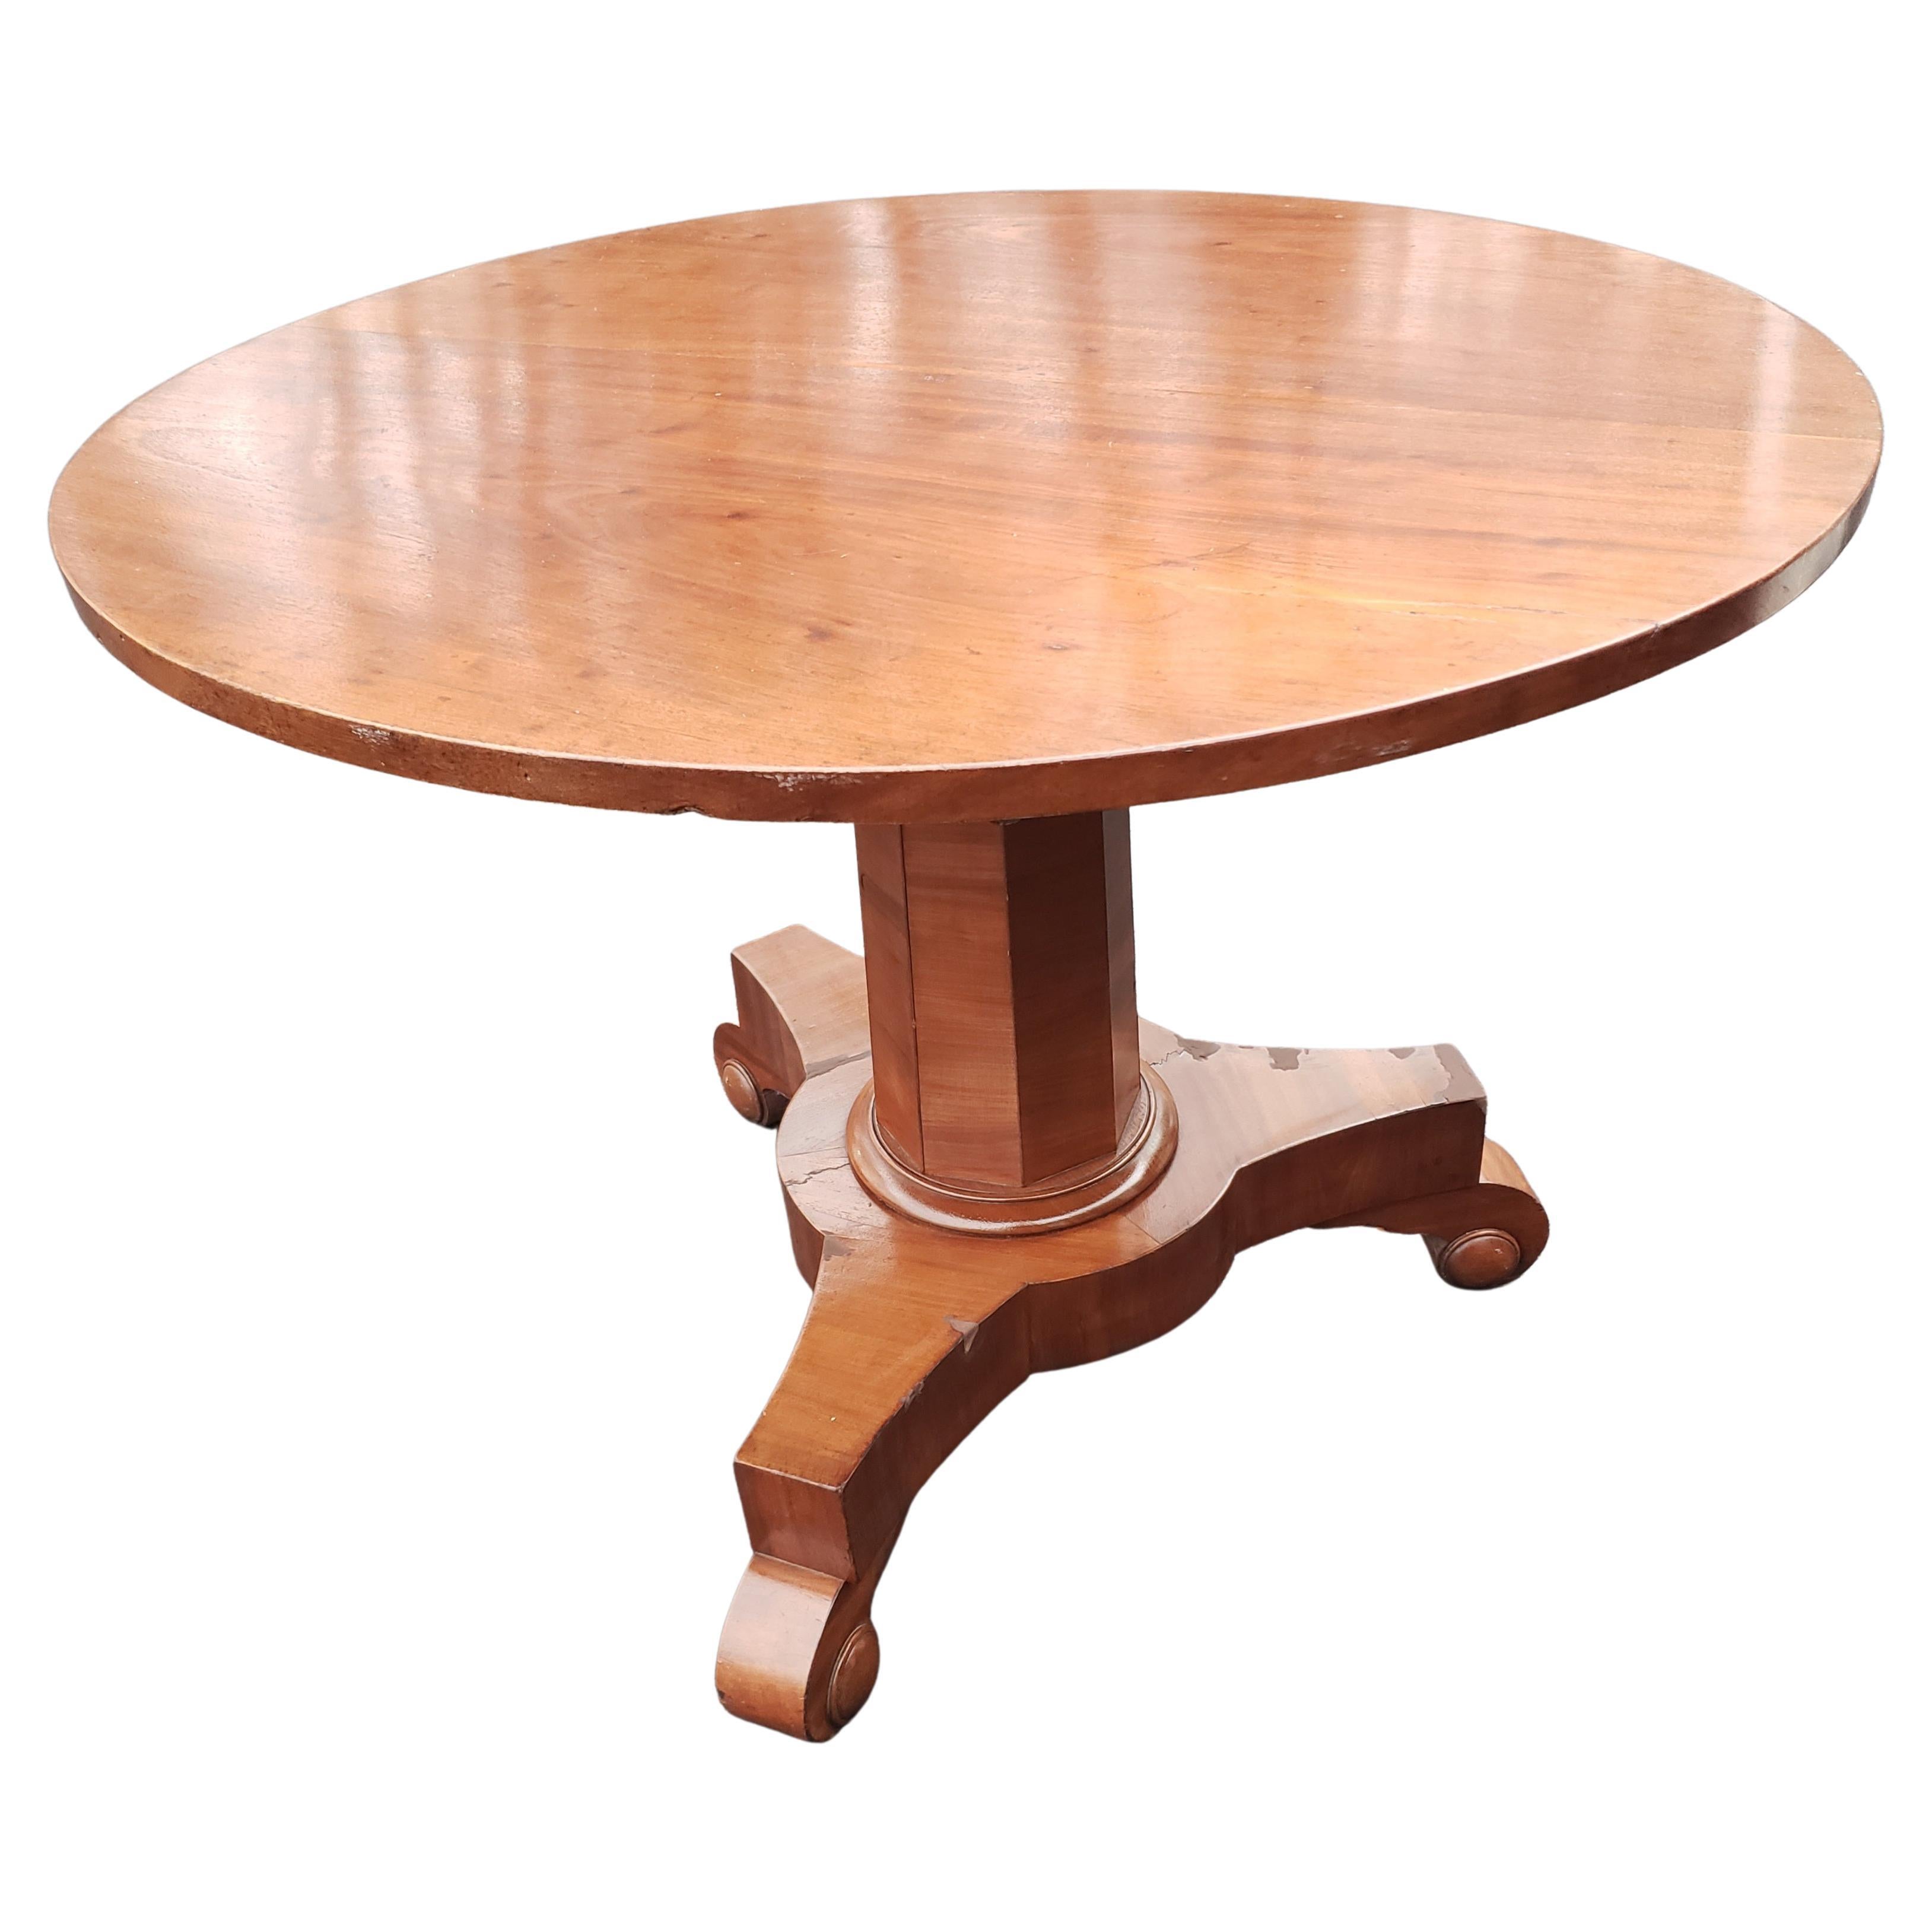 An Antique Victorian circular Tilt Top breakfast table. Delightful looking quality made table with three pronged foot and central pedestal.

Offered in used vintage condition with signs of age, wear in a couple of spots on feet, as might be